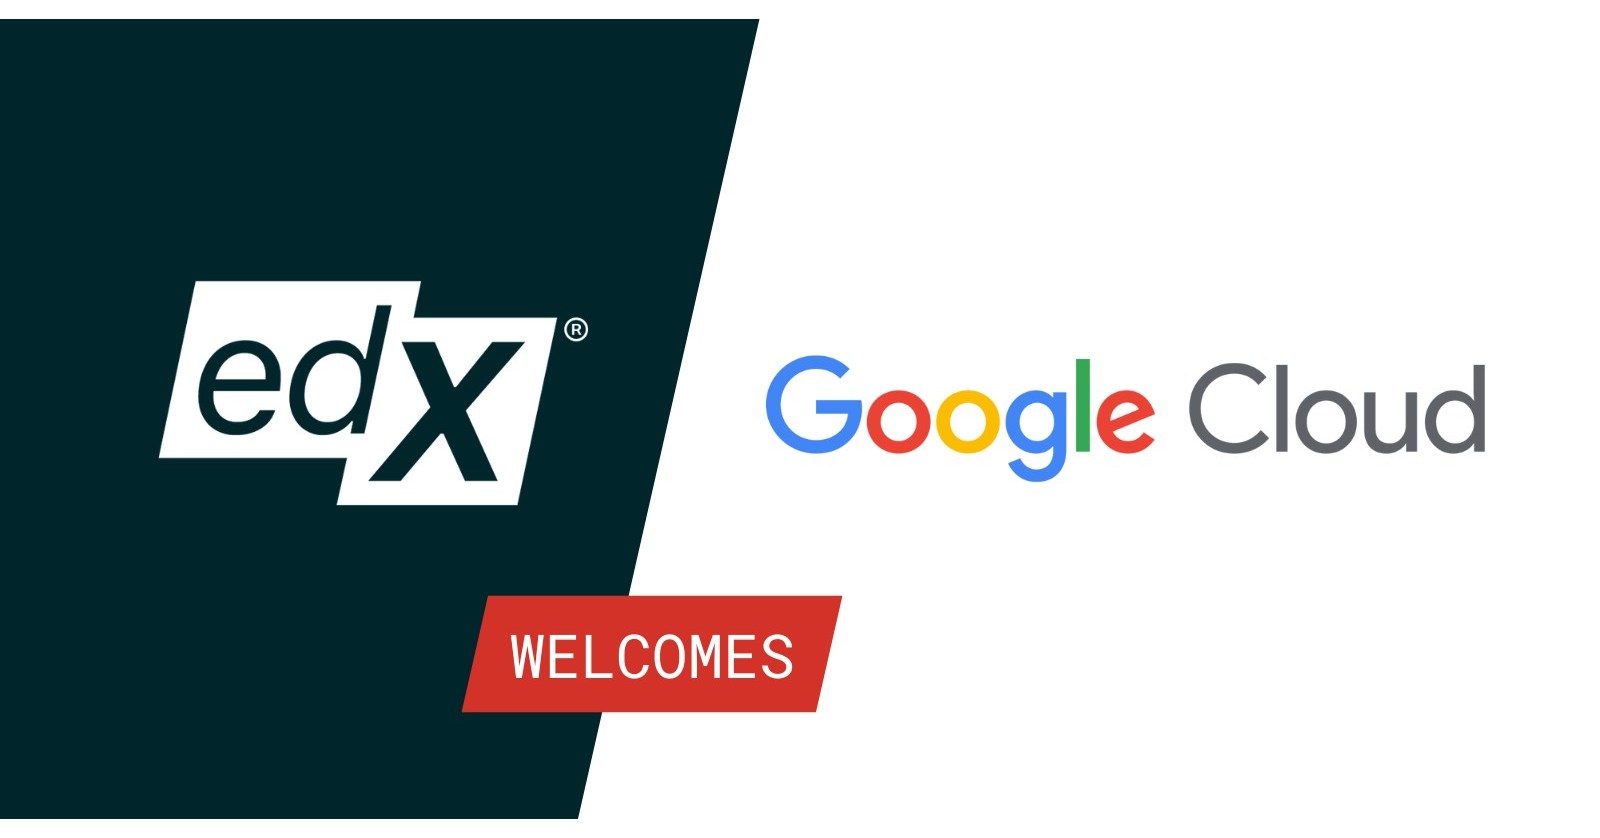 Google Cloud and edX Partner to Launch Cloud Computing Professional Certificate